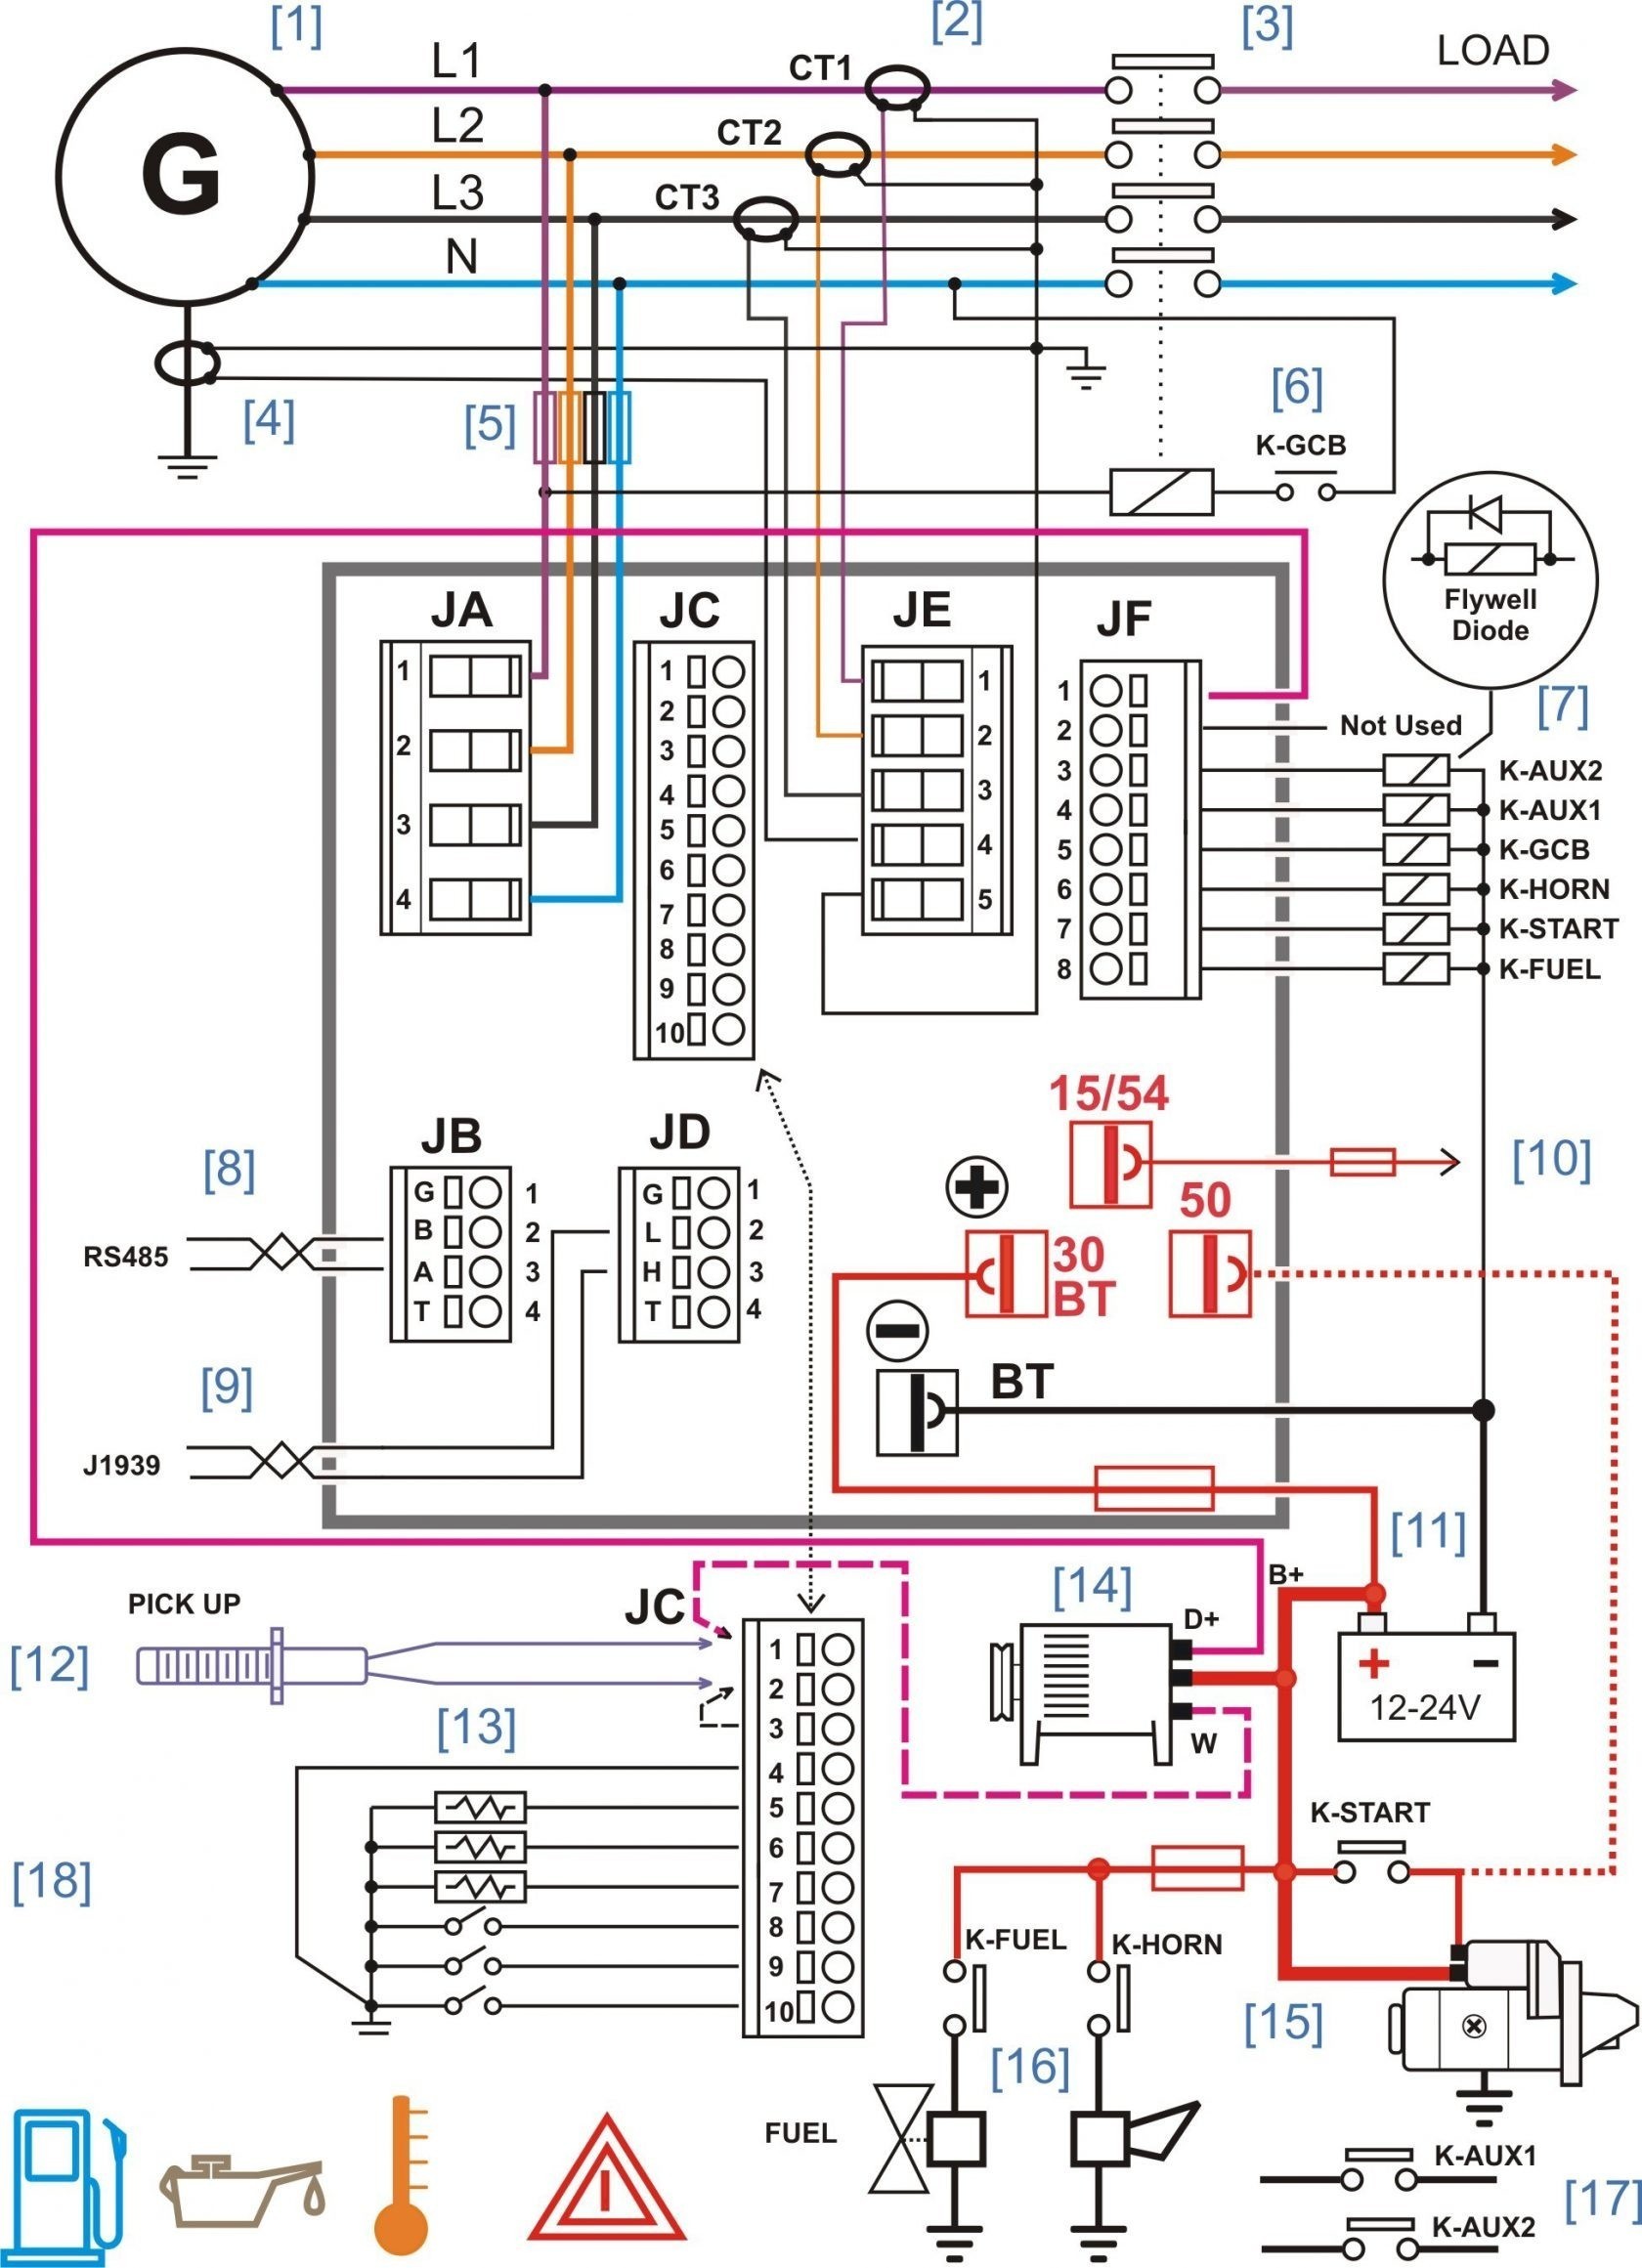 Typical Wiring Diagram for House New Typical Wiring Diagram Best Best Wiring Diagram Od Rv Park